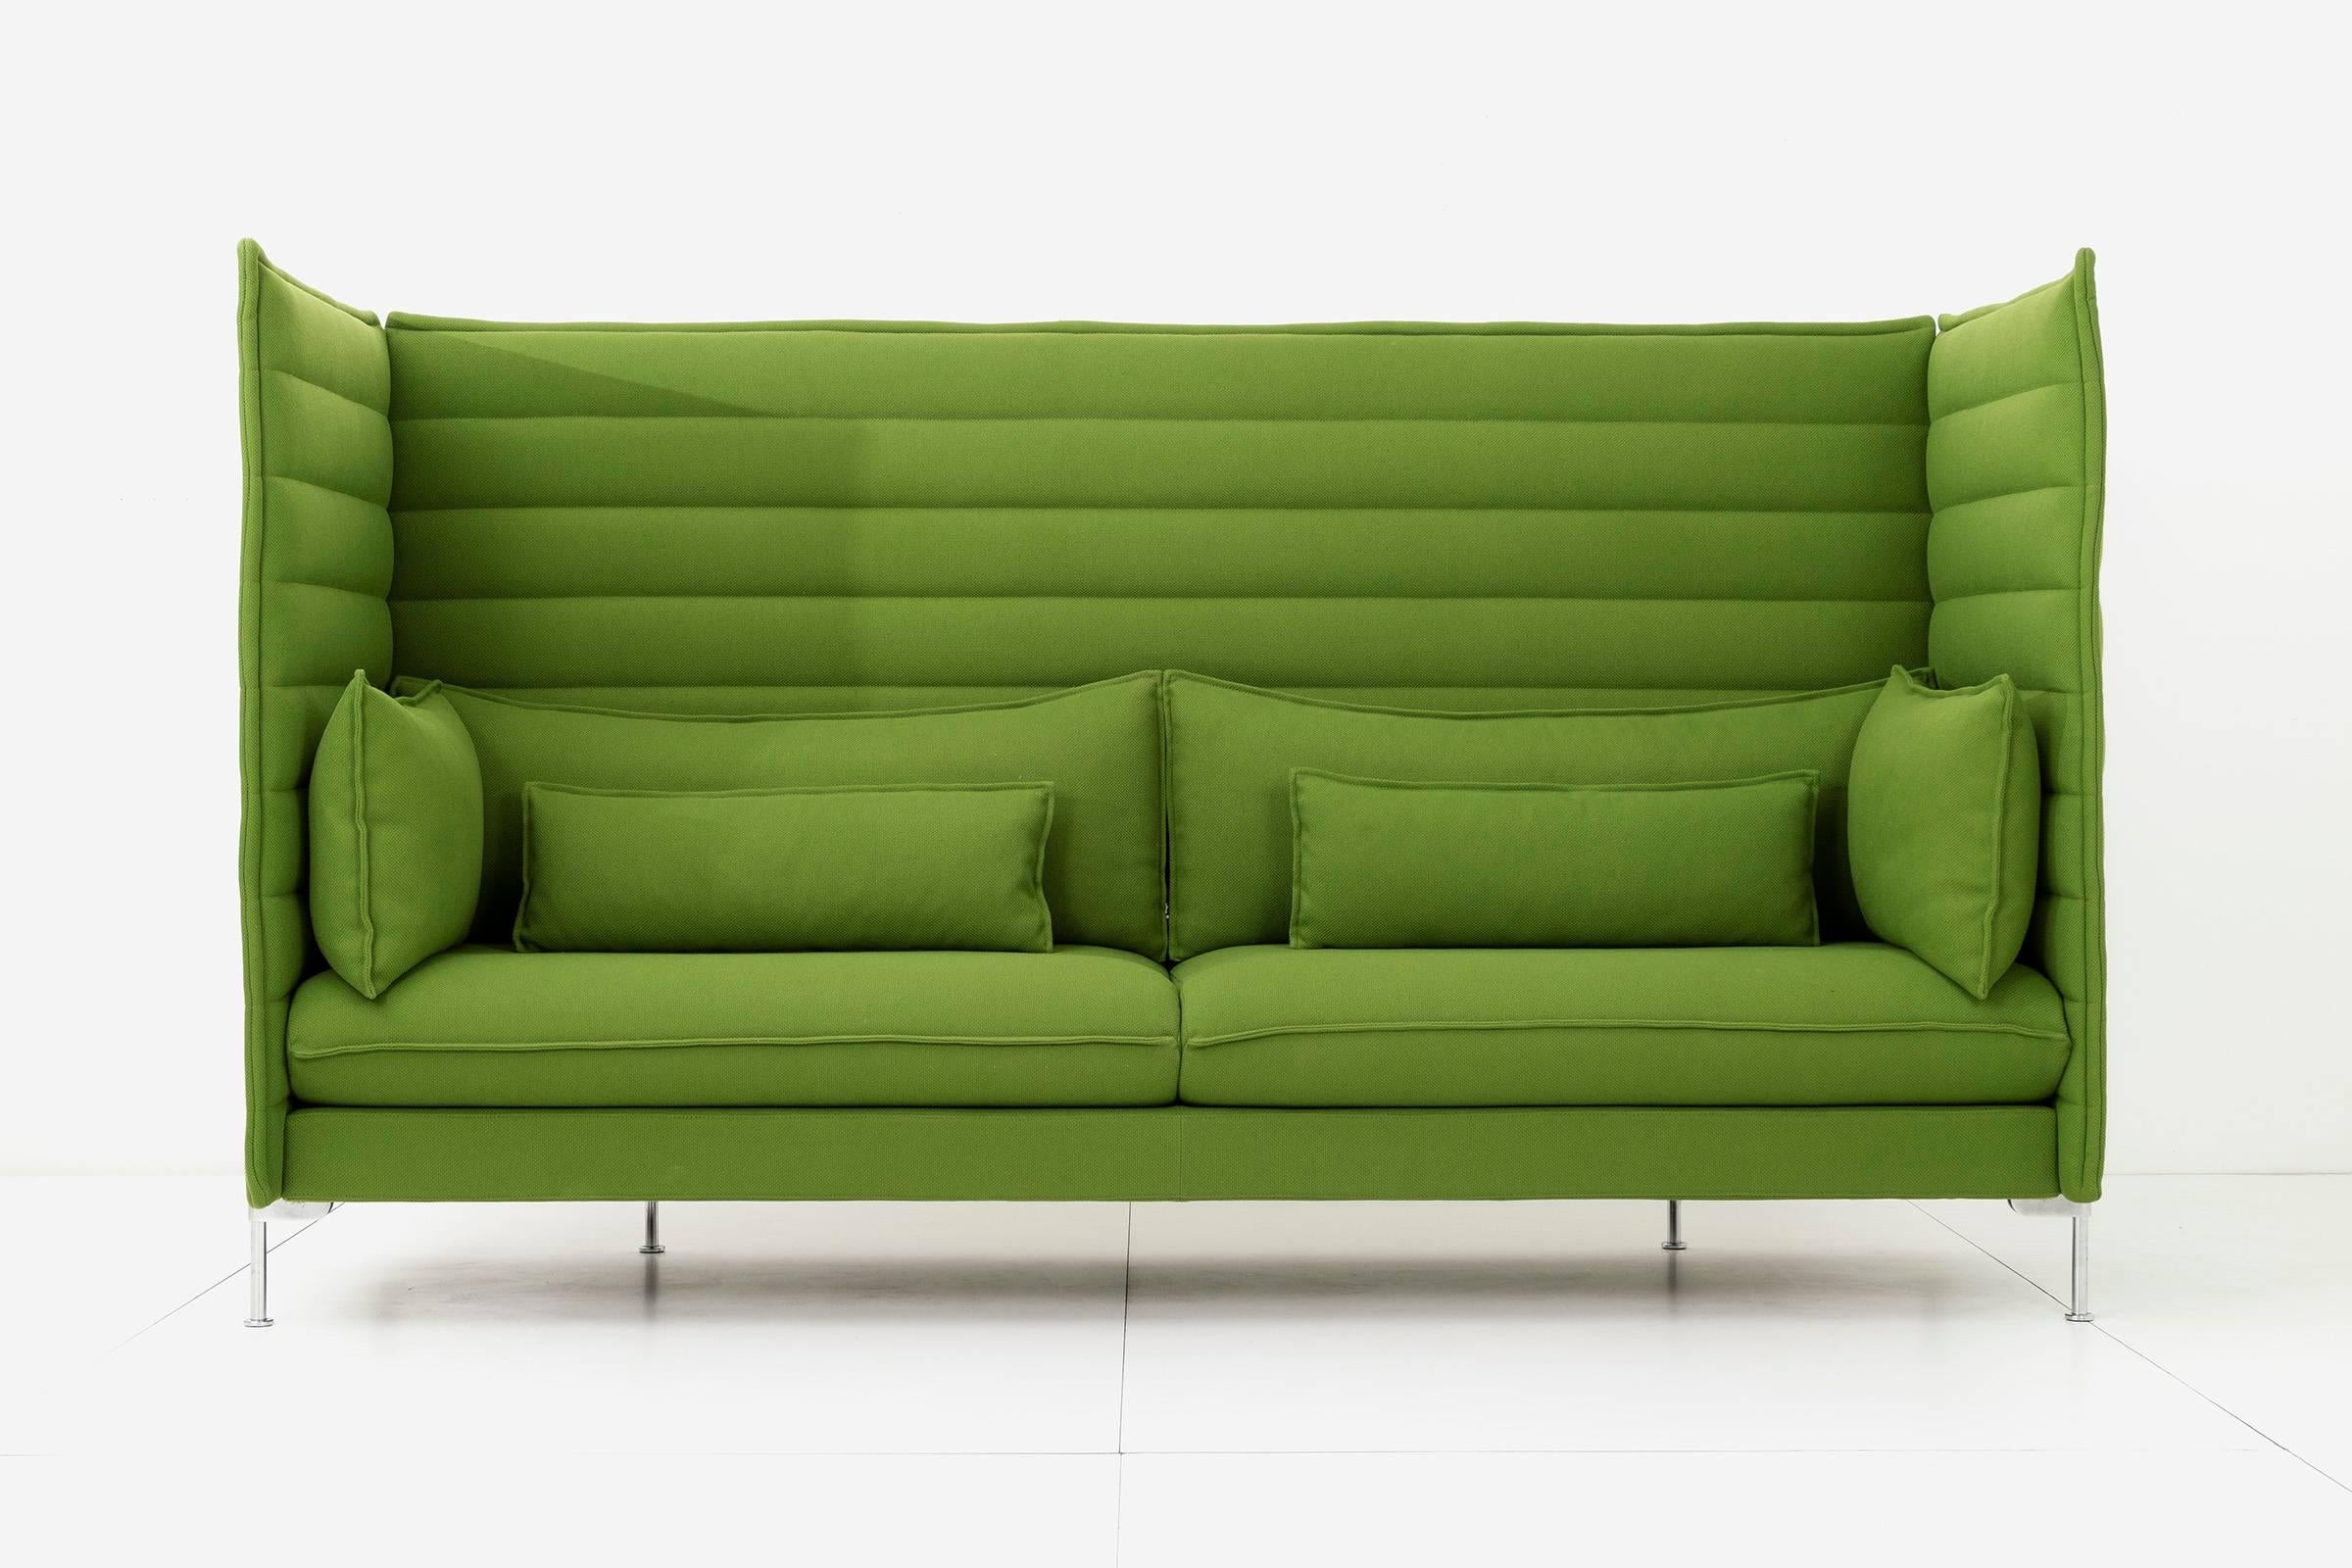 Pair of Alcove Xtra high three-seat sofas designed by Ronan & Erwan Bouroullec for Vitra. Original Laser panels upholstery in 09 Green. High quality Riri zipper.